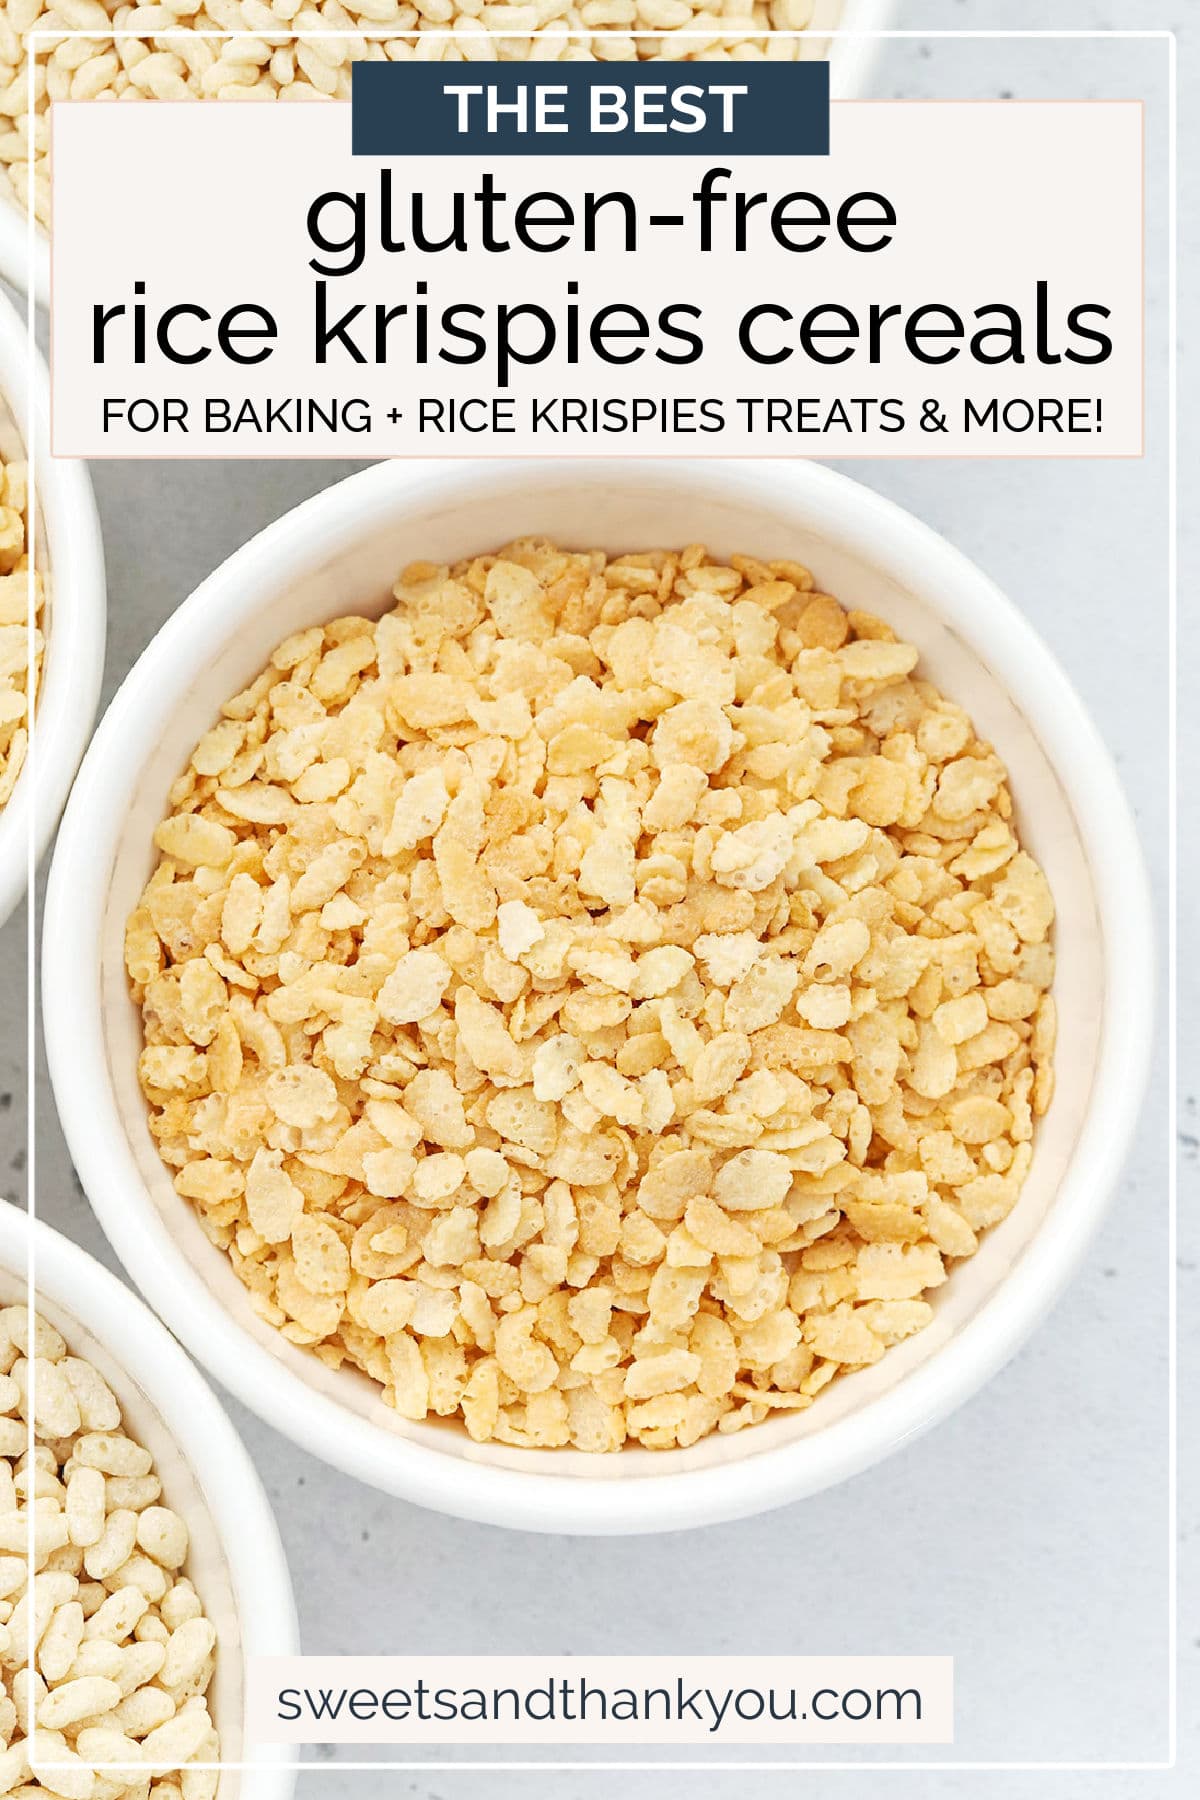 Rice Krispies are NOT gluten-free, but these are the best brands of gluten-free crisp rice cereal for gluten-free Rice Krispies treats & more! // what brands of rice krispies are gluten-free? gluten-free crisp rice cereal // gluten-free rice krispies treats cereal // gluten-free baking tips // gluten-free taste test // the best gluten-free rice krispies treats // gluten-free rice Krispies brands //